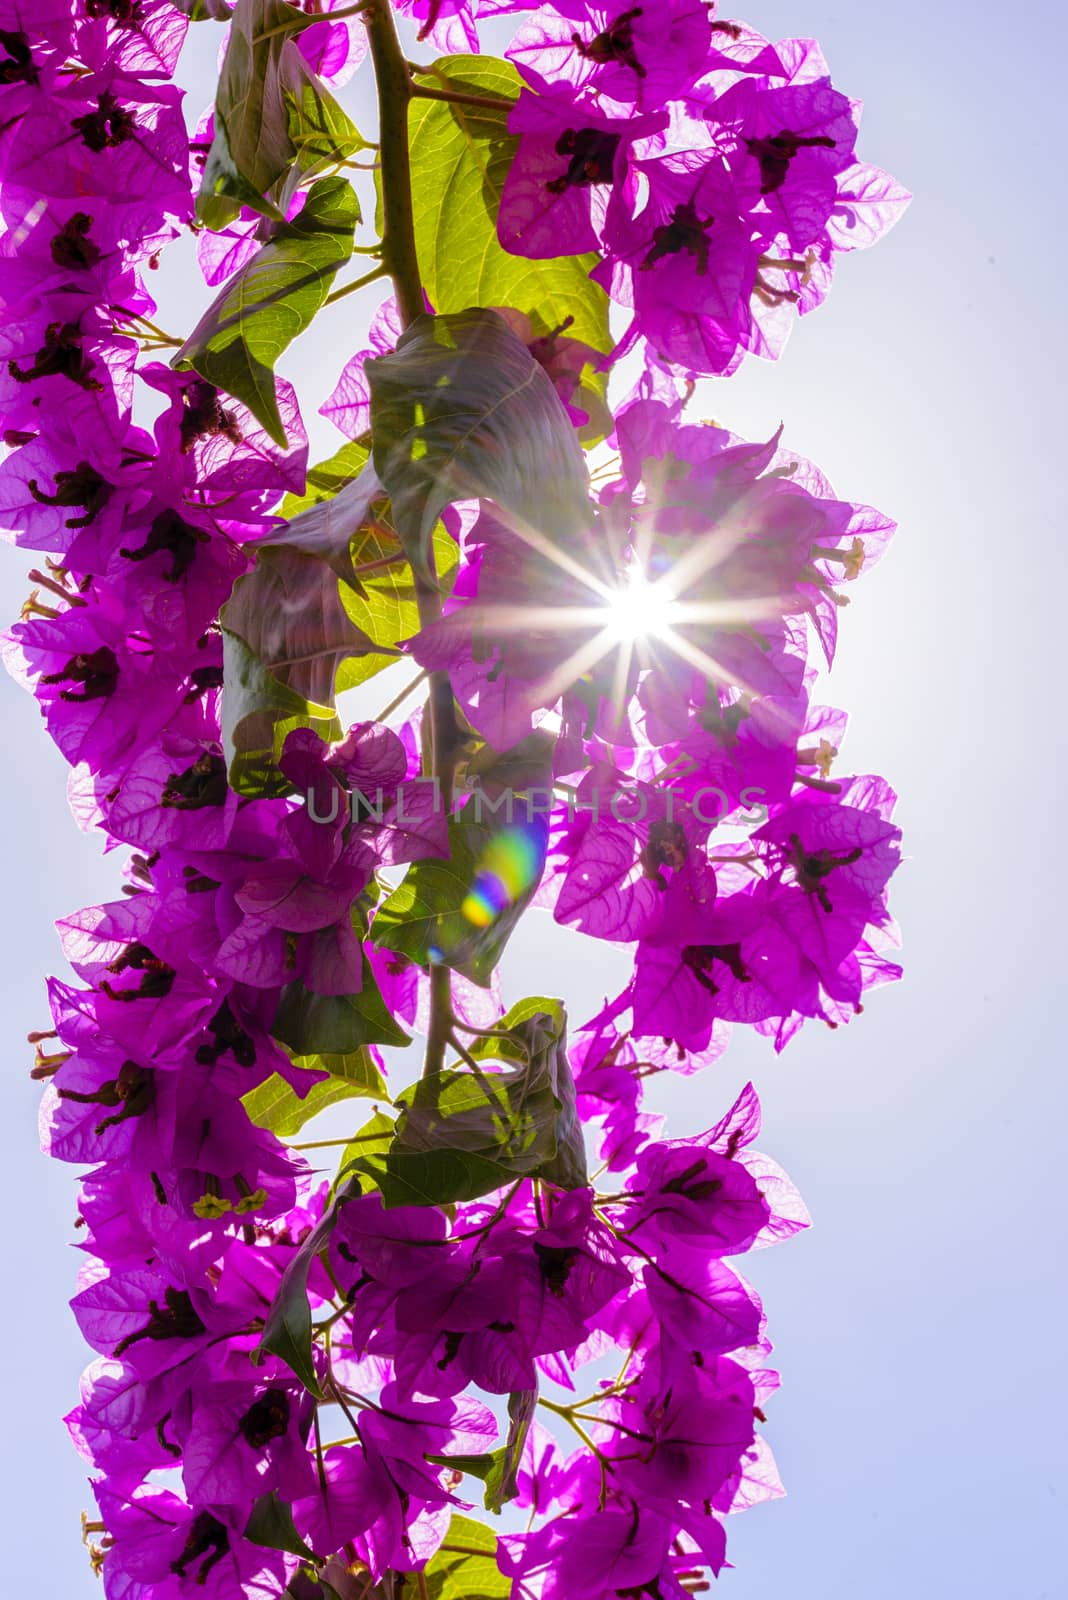 Bougainvilleas or Paper flower treetop against blue sky as background and backlit with sunstars pouring through the blossoms